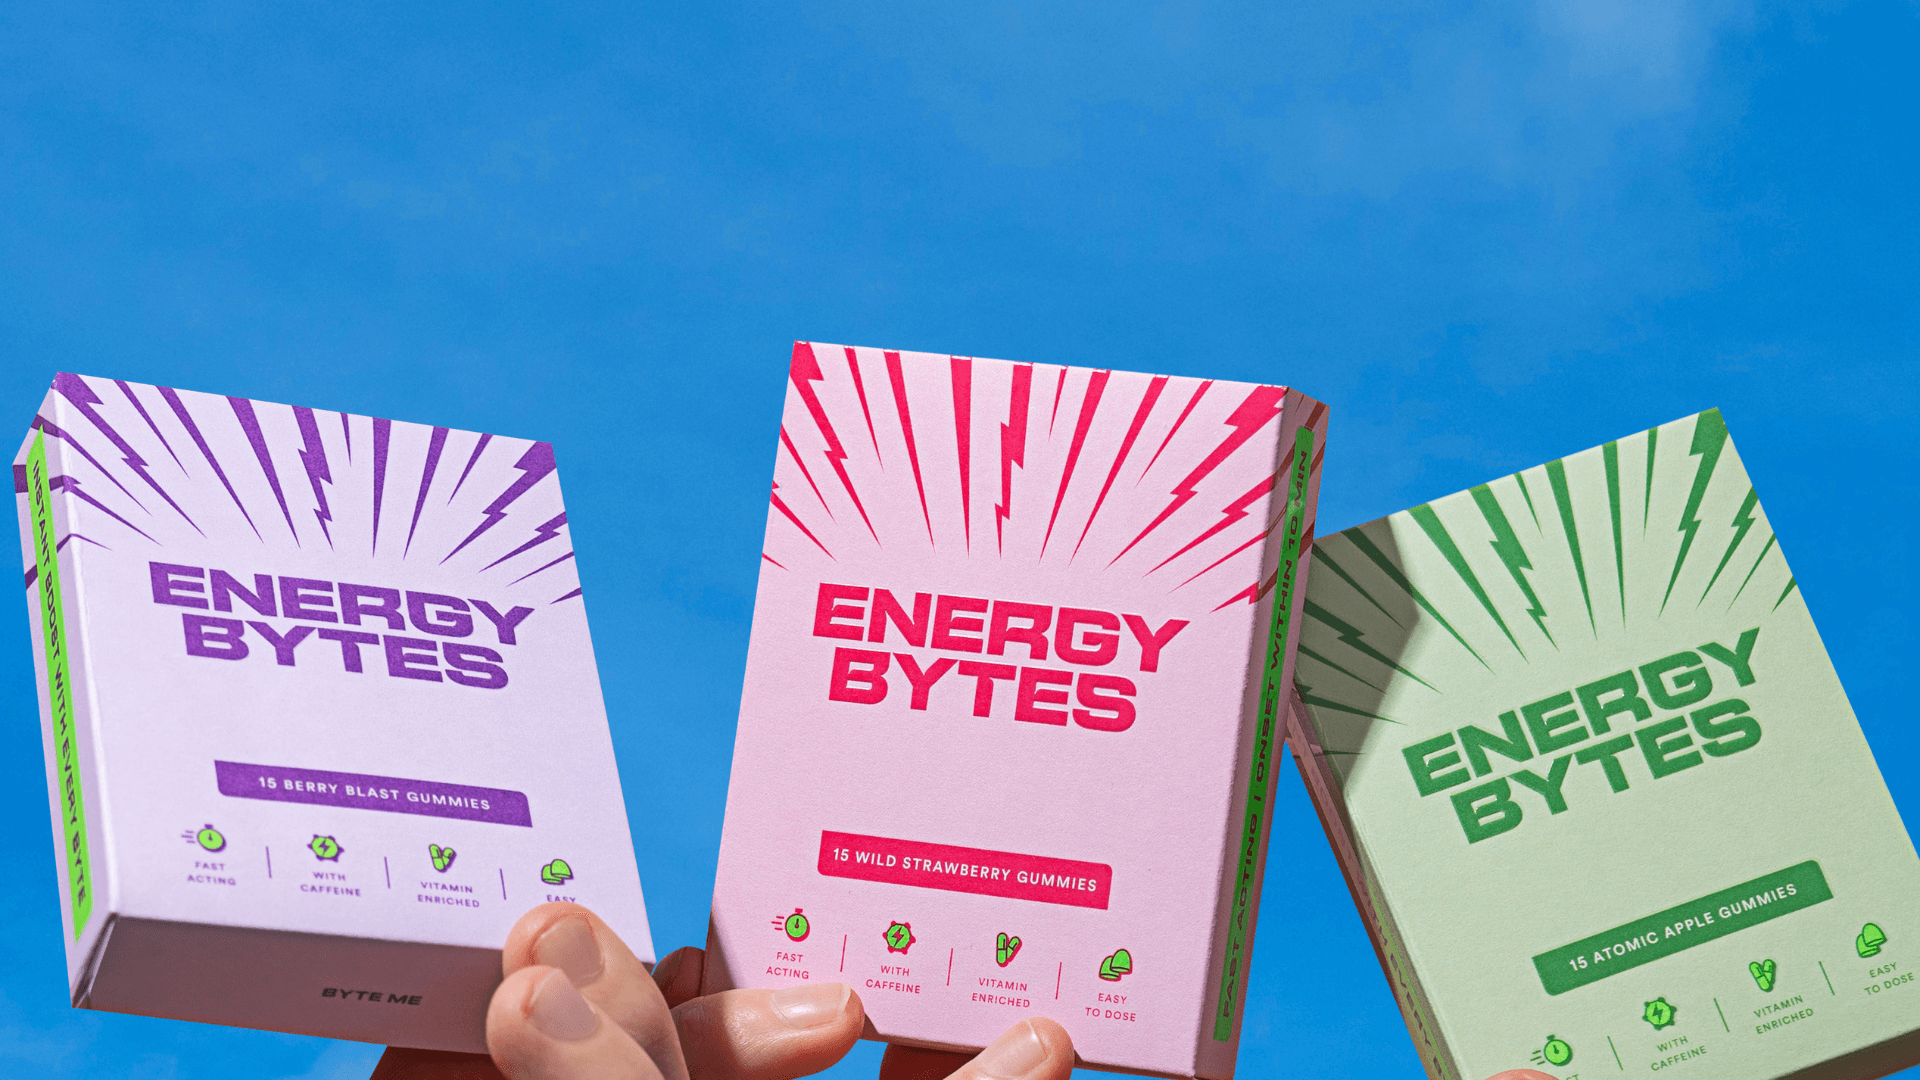 Hands holding up Energy Bytes gummy packets in Berry Blast, Wild Strawberry, and Atomic Apple flavours against a clear blue sky.